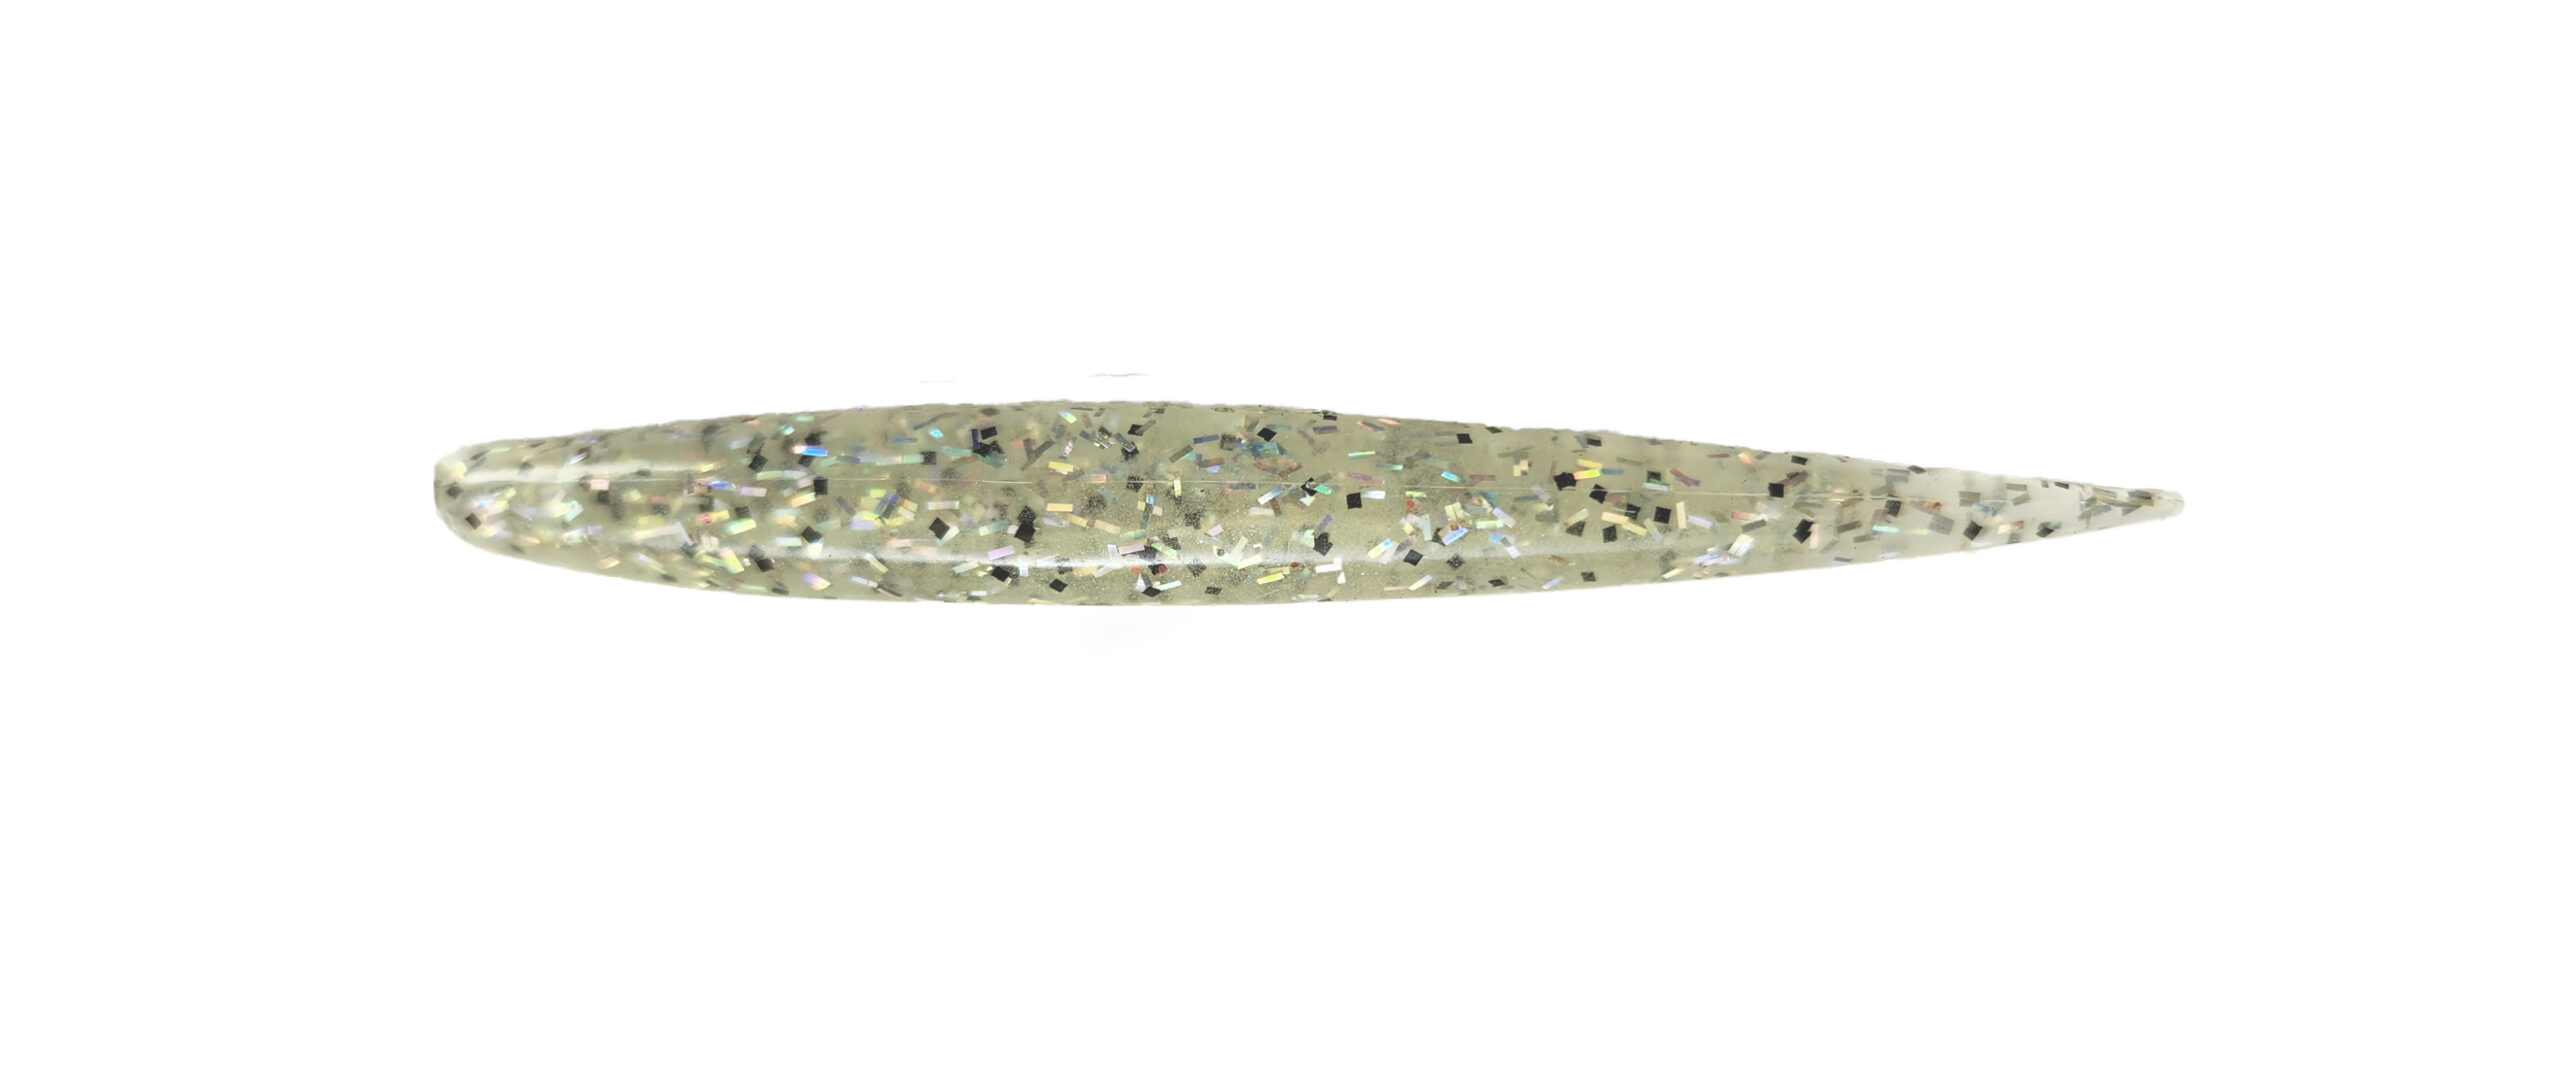 Ghost Shrimp (Glow) Stick Bait – 4.25 inches – Slayer Inc. Lure